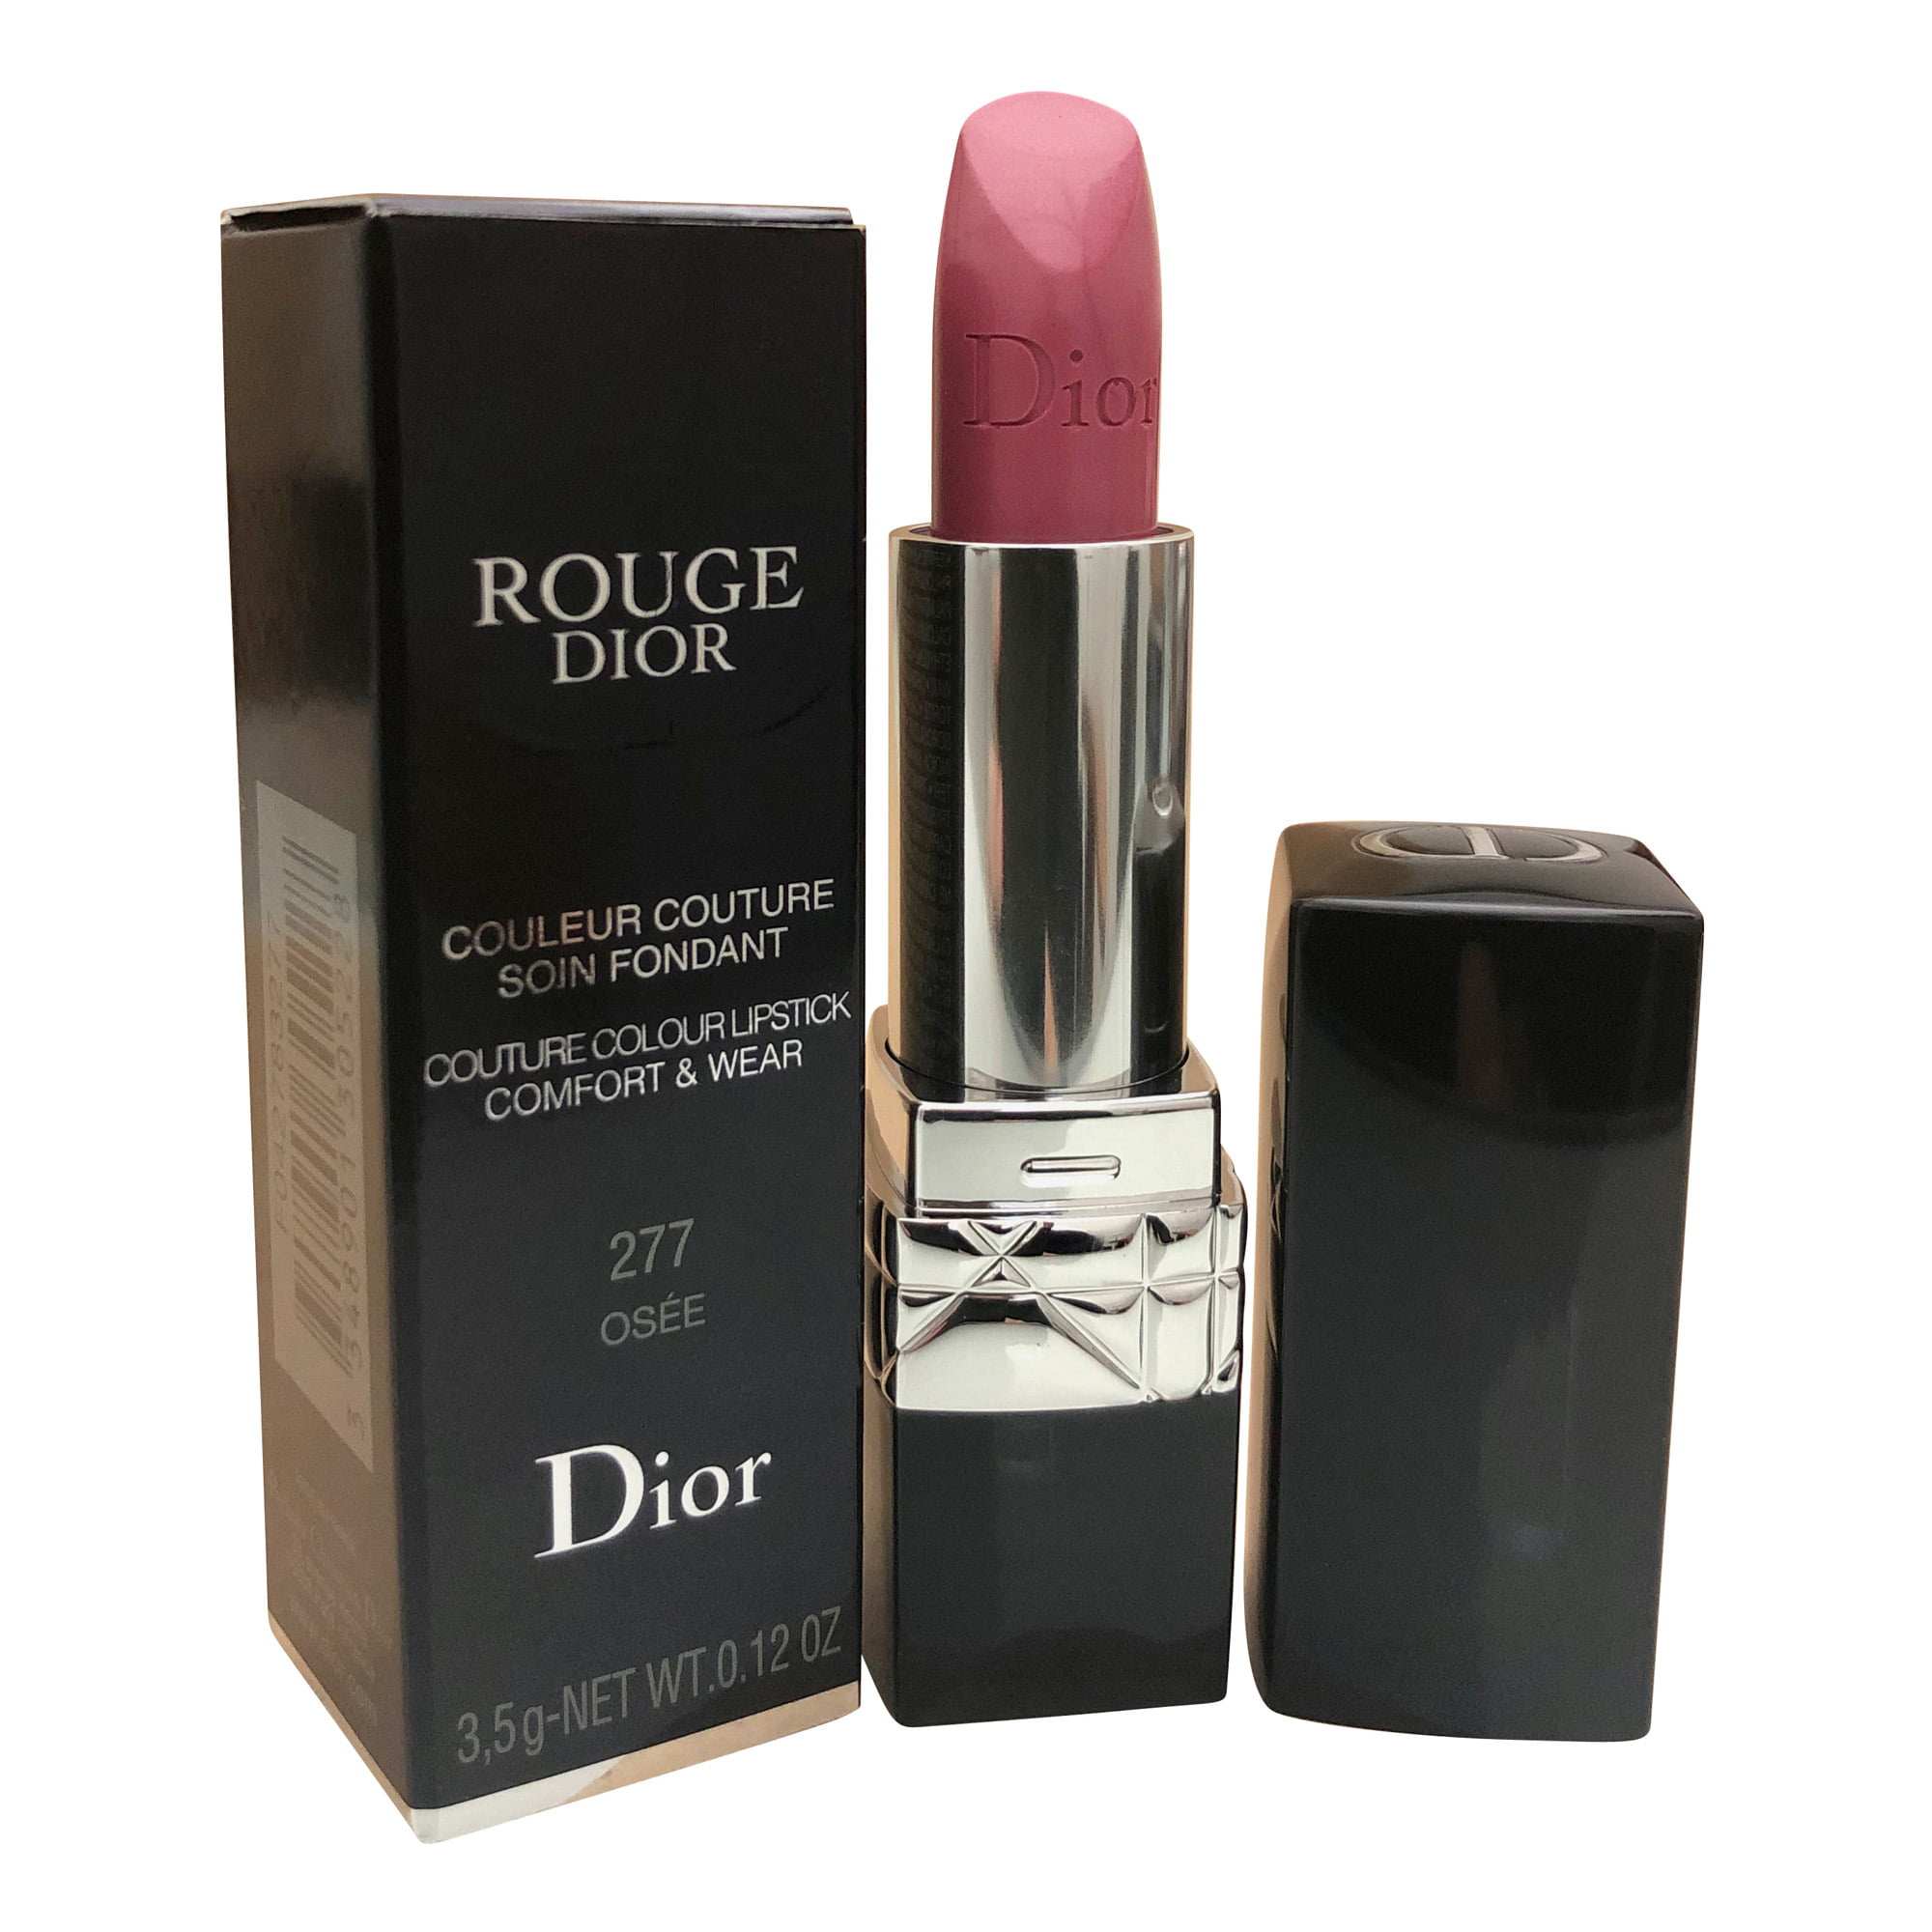 Dior Rouge Dior Lipstick 277 Osee 0.12 